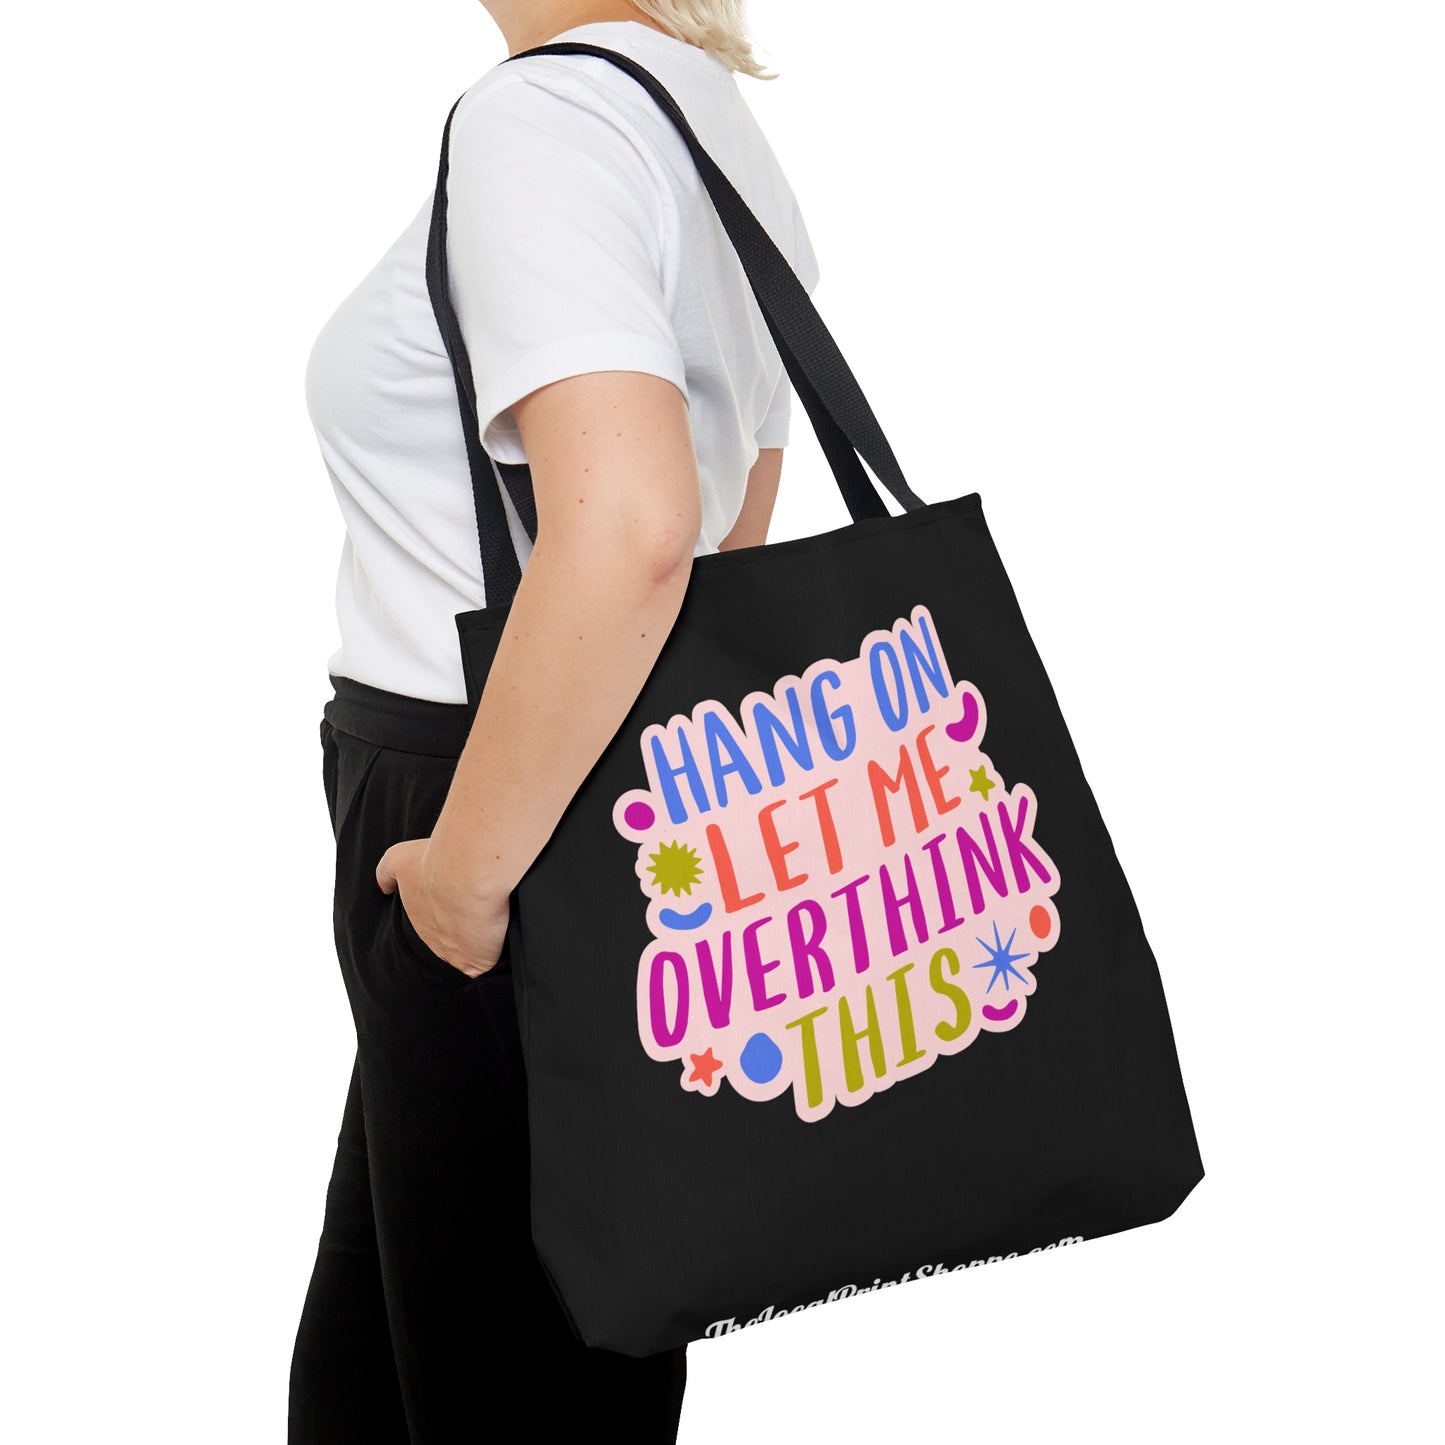 Hang on Let Me Overthink This Tote Bag